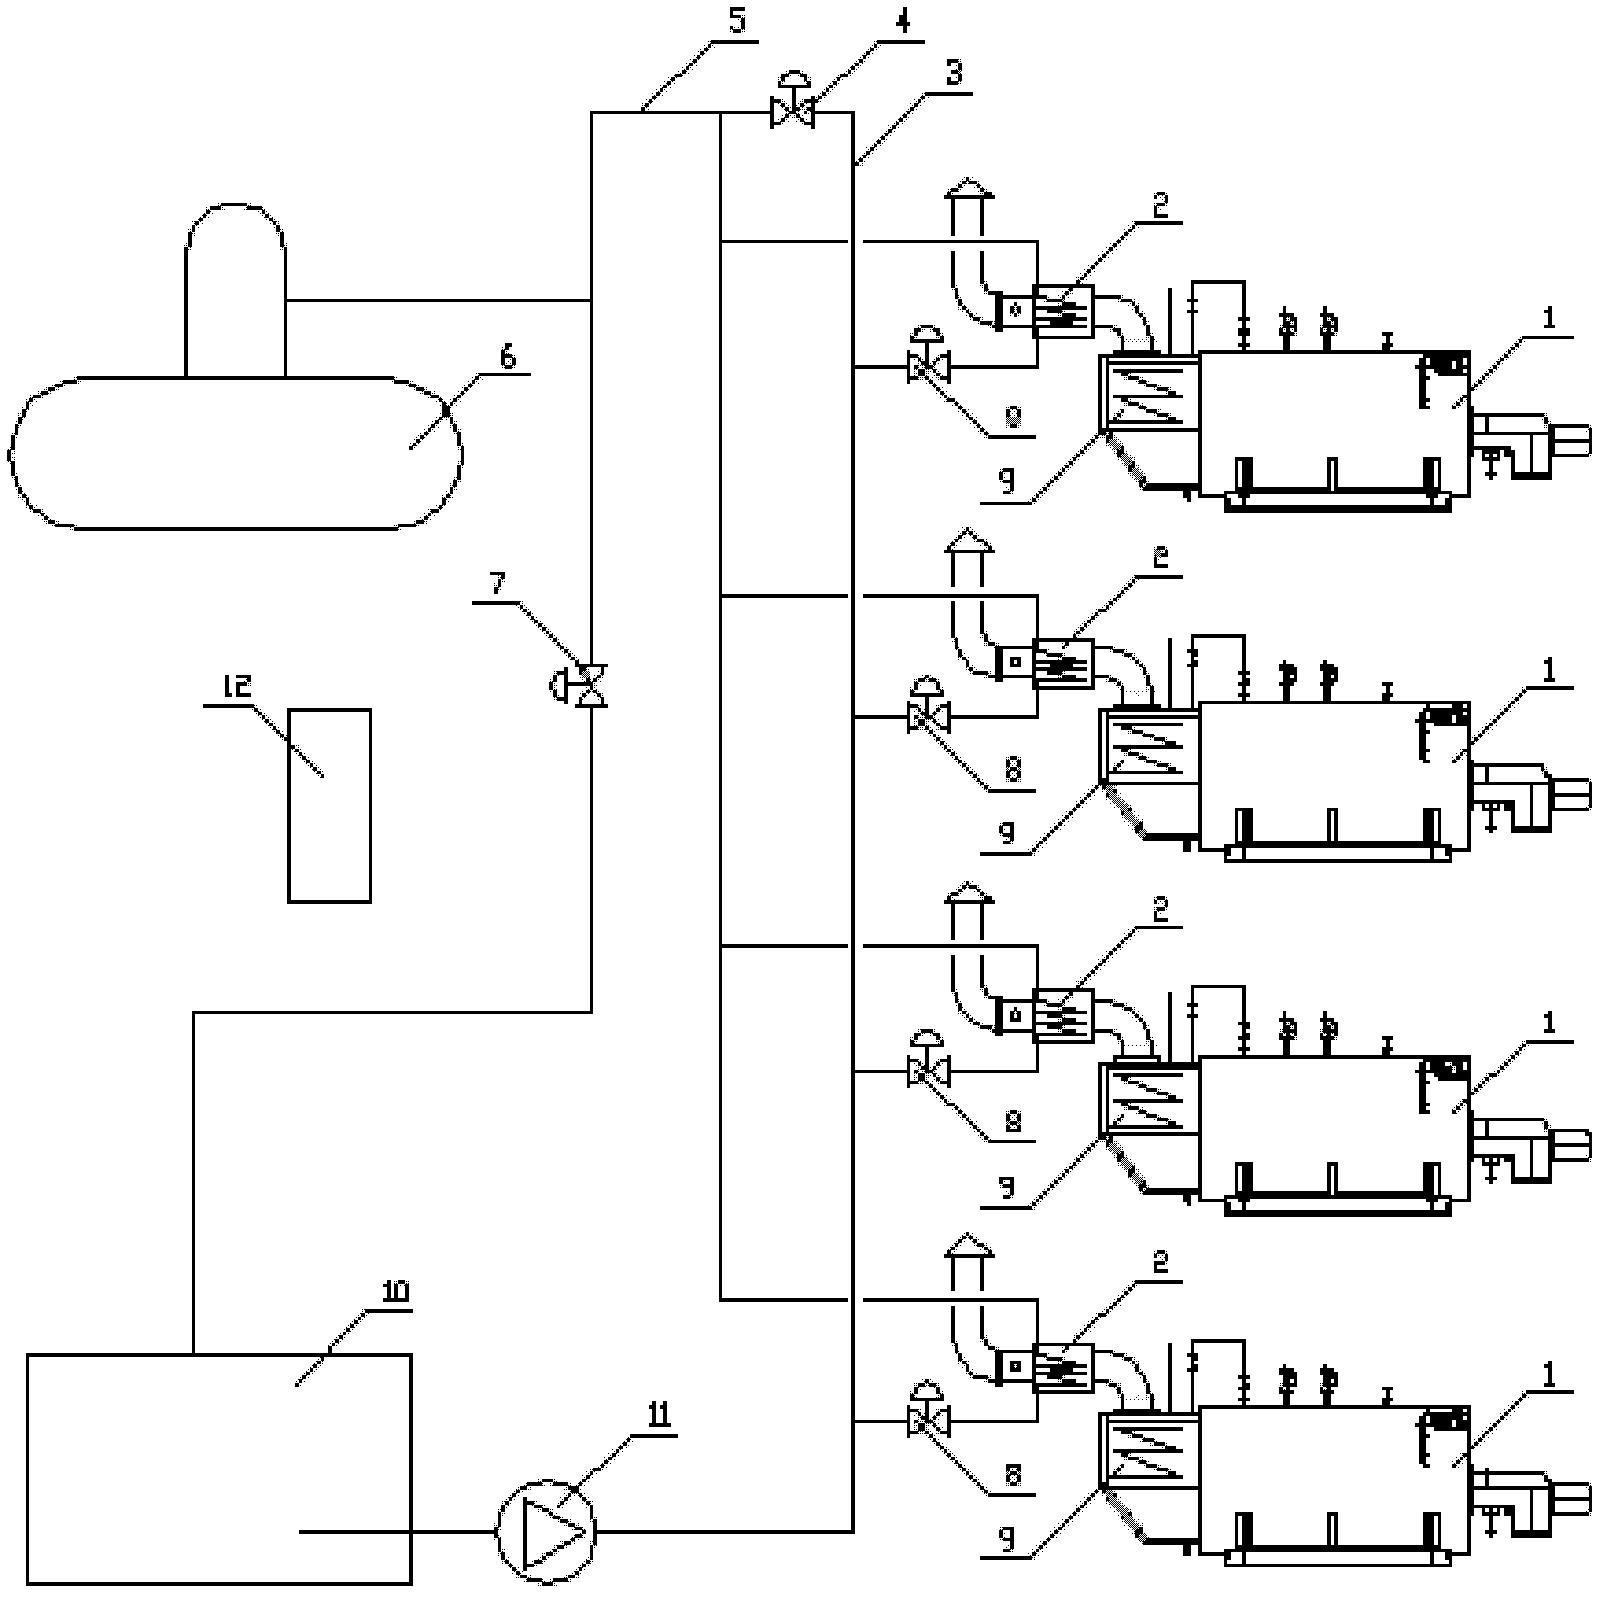 Water feeding system for multiple condensing boilers